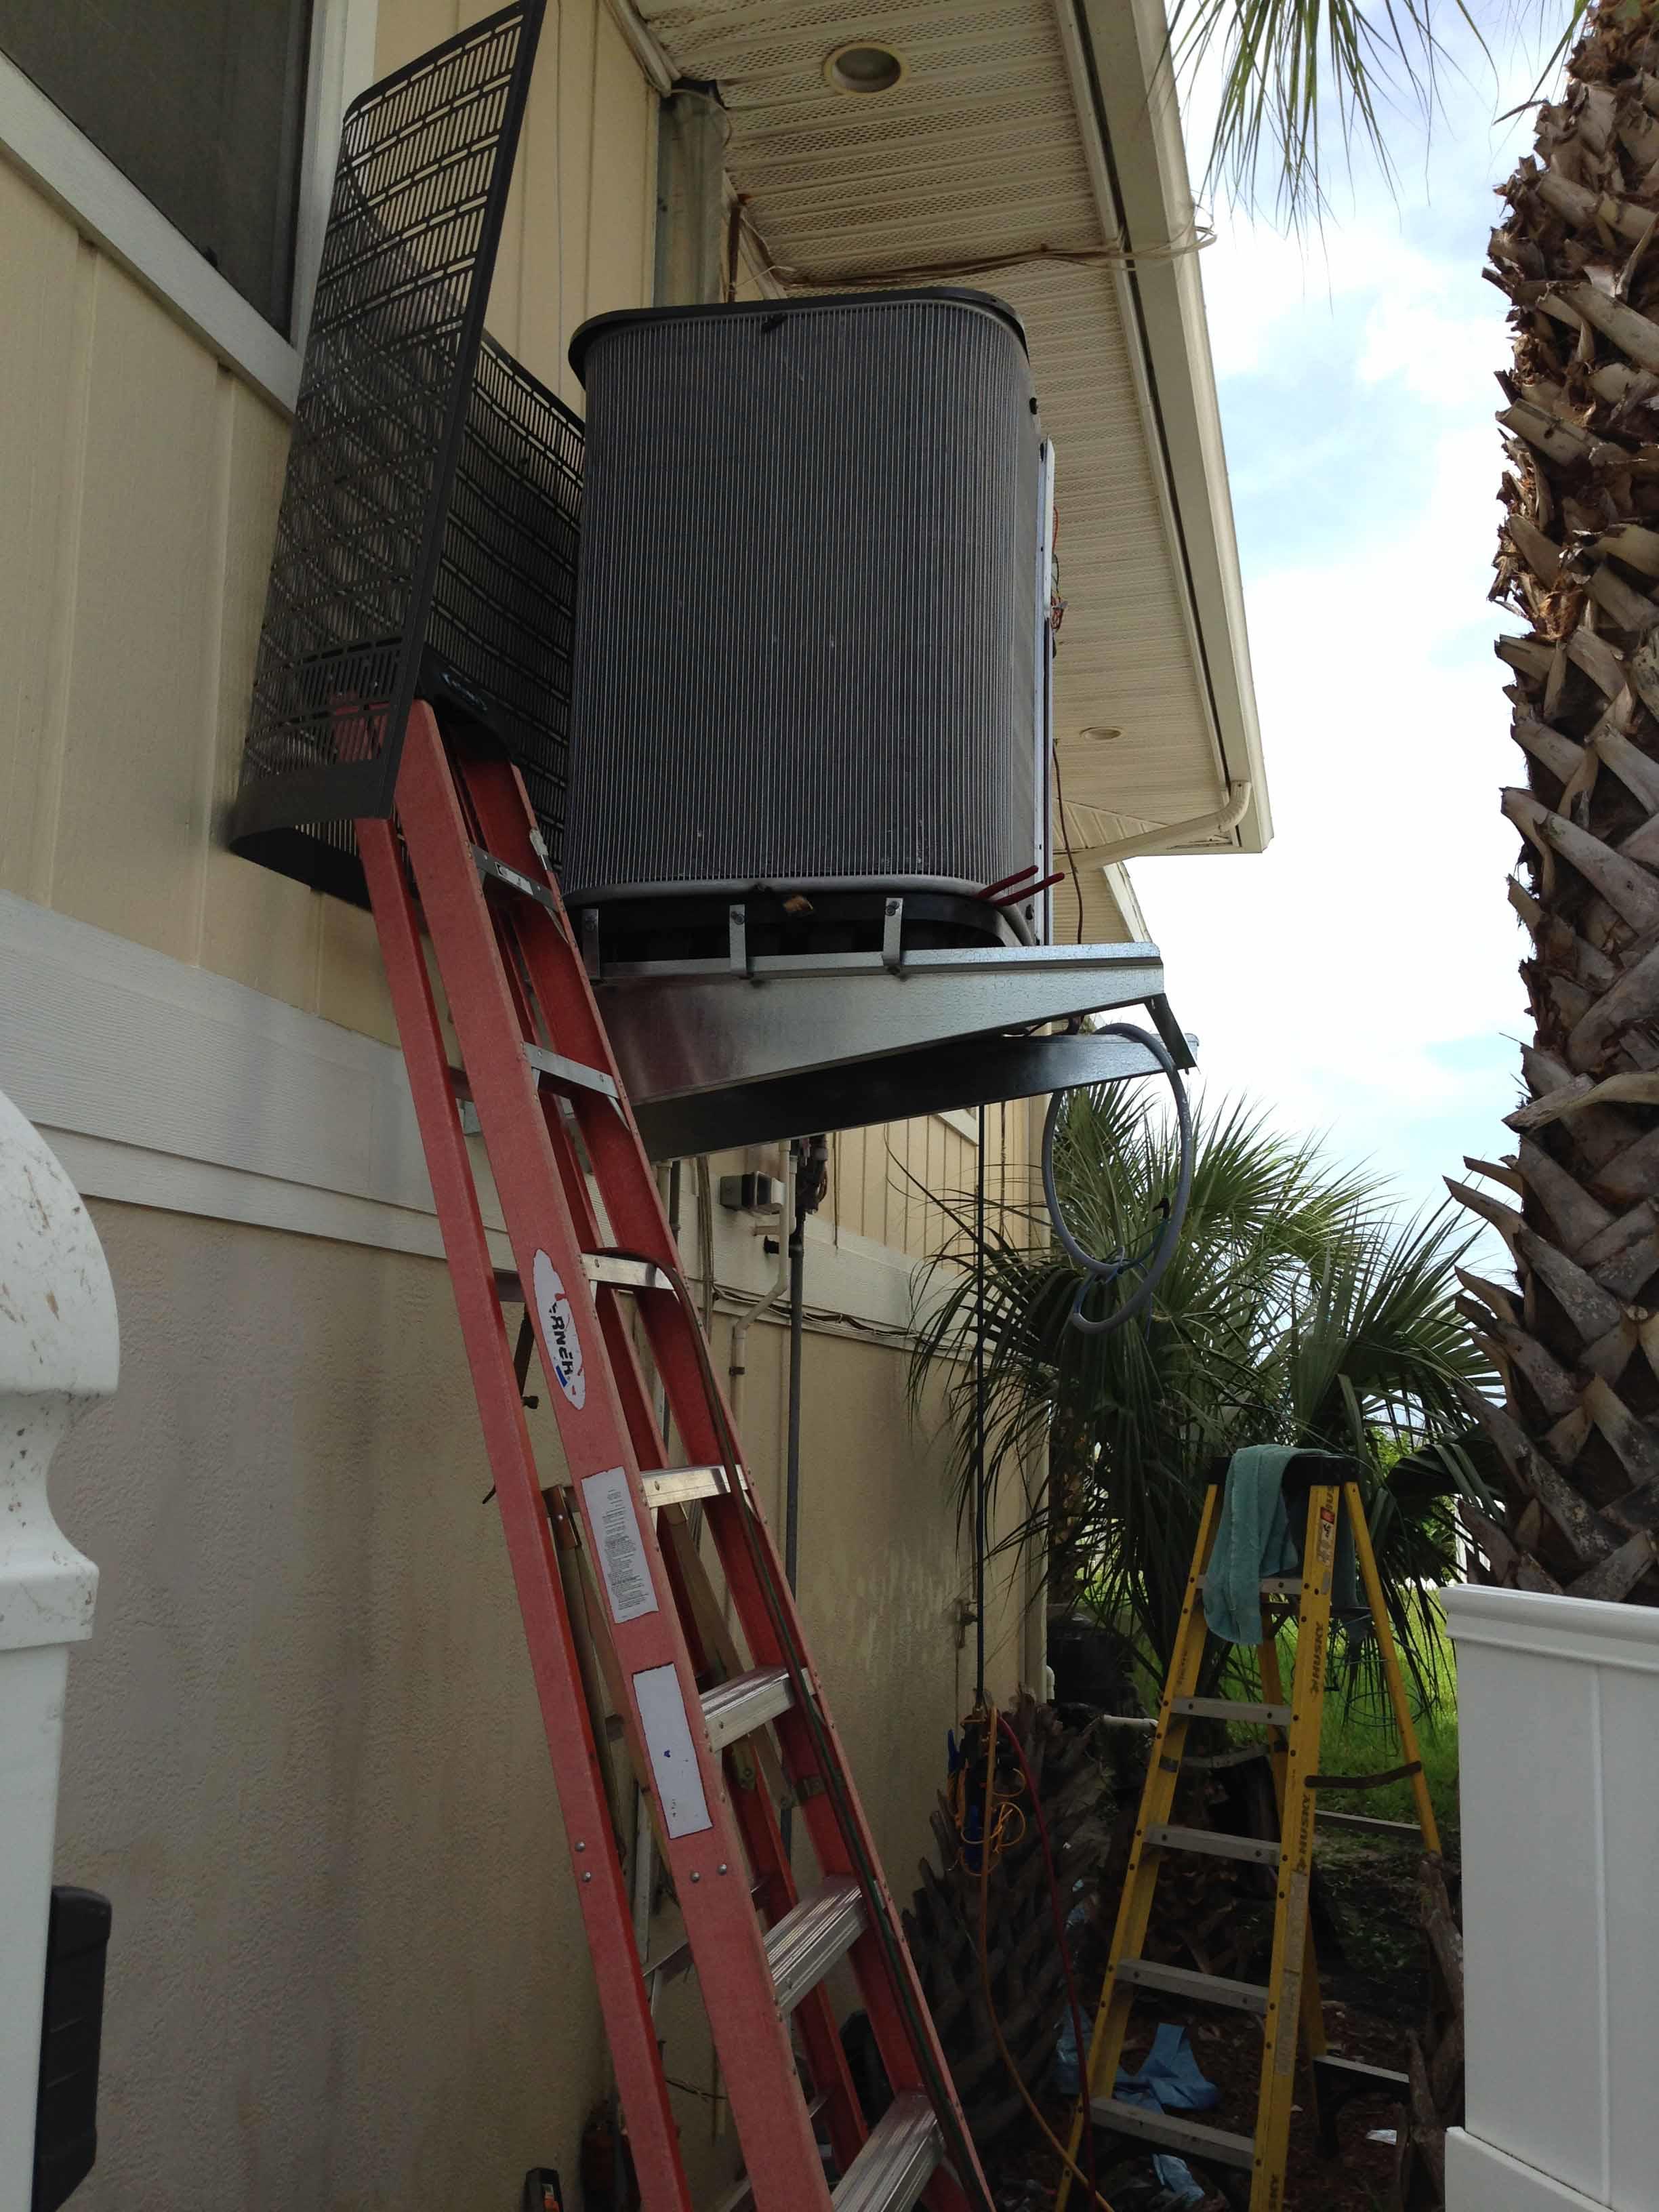 Florida Energy Air Conditioning Inc. New Port Richey (727)442-8383